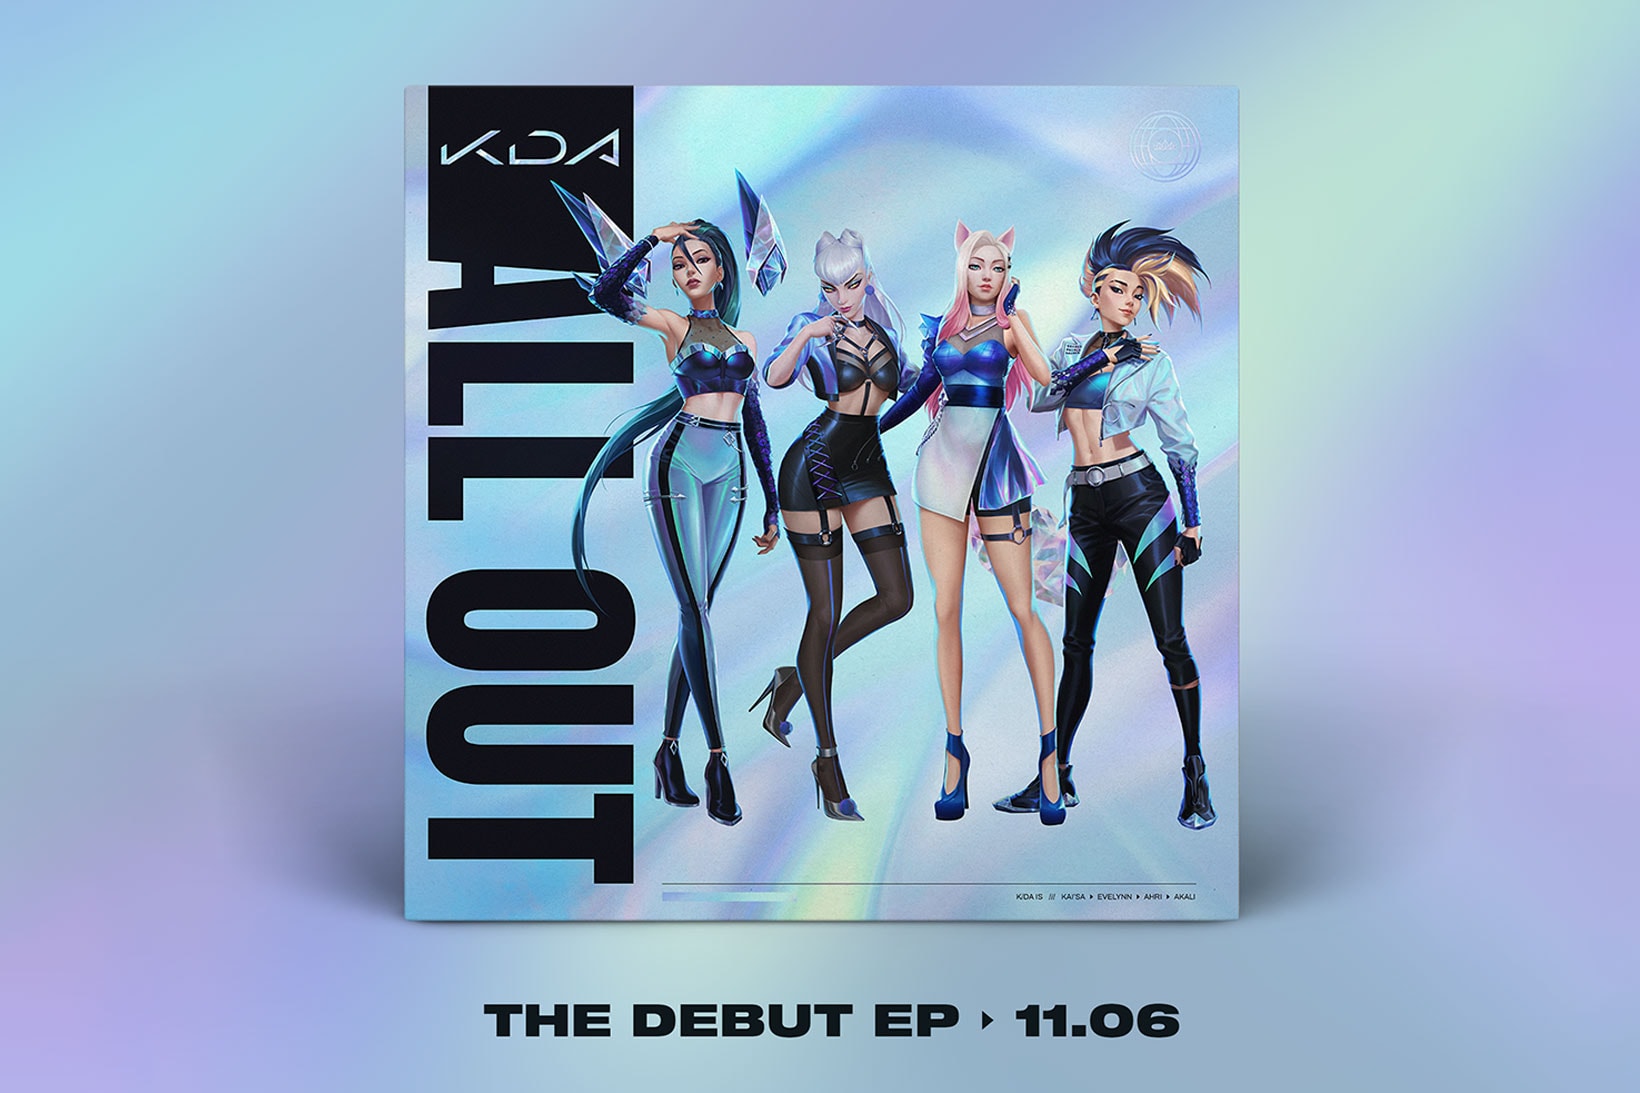 kda all out debut ep collaborators full list twice gidle madison beer wolftyle kim petras league of legends k-pop riot games